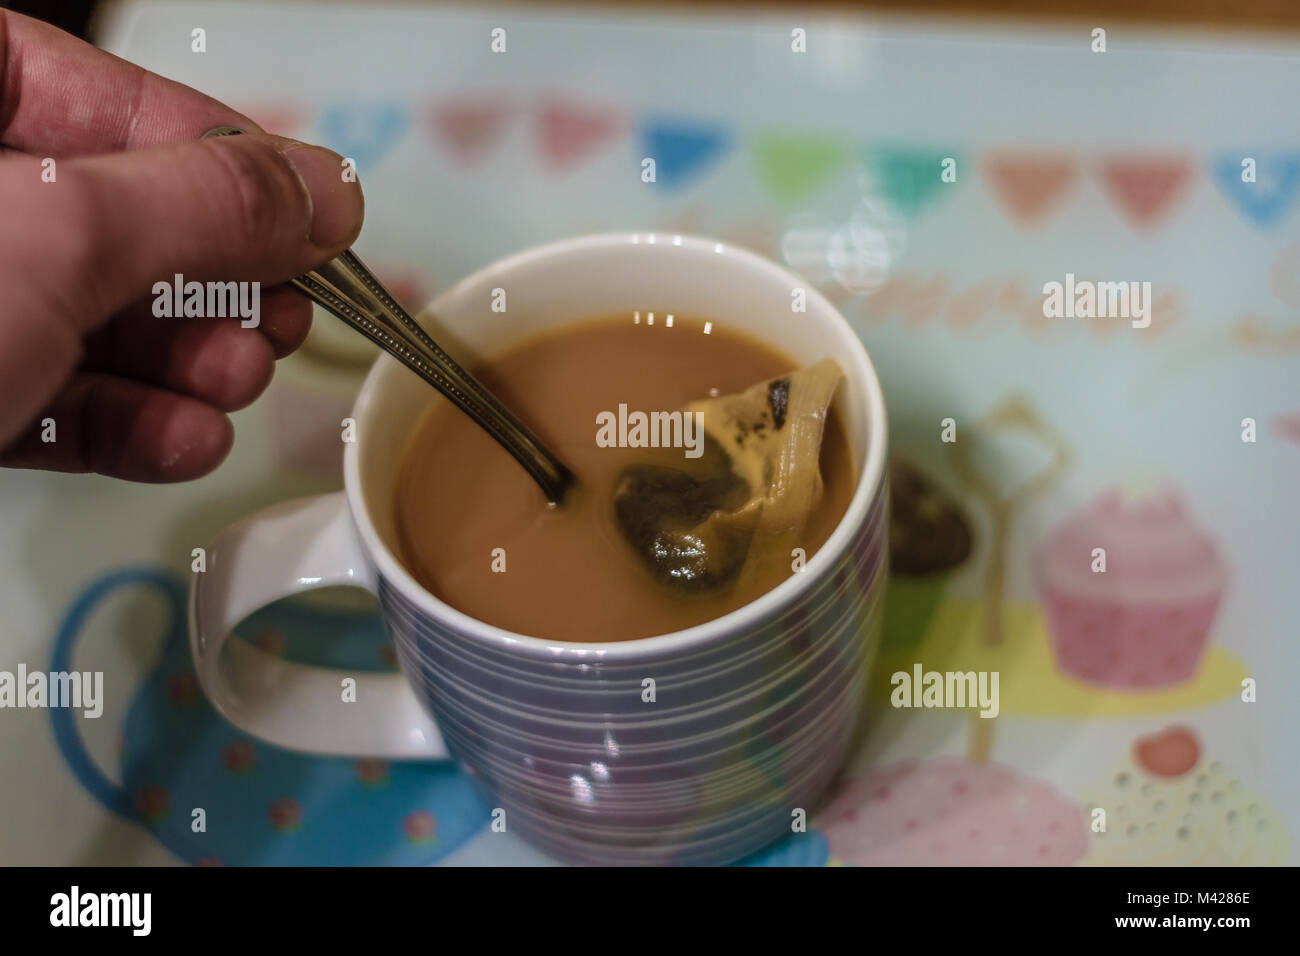 Mug of tea made with a teabag being stirred with a teaspoon. Stock Photo